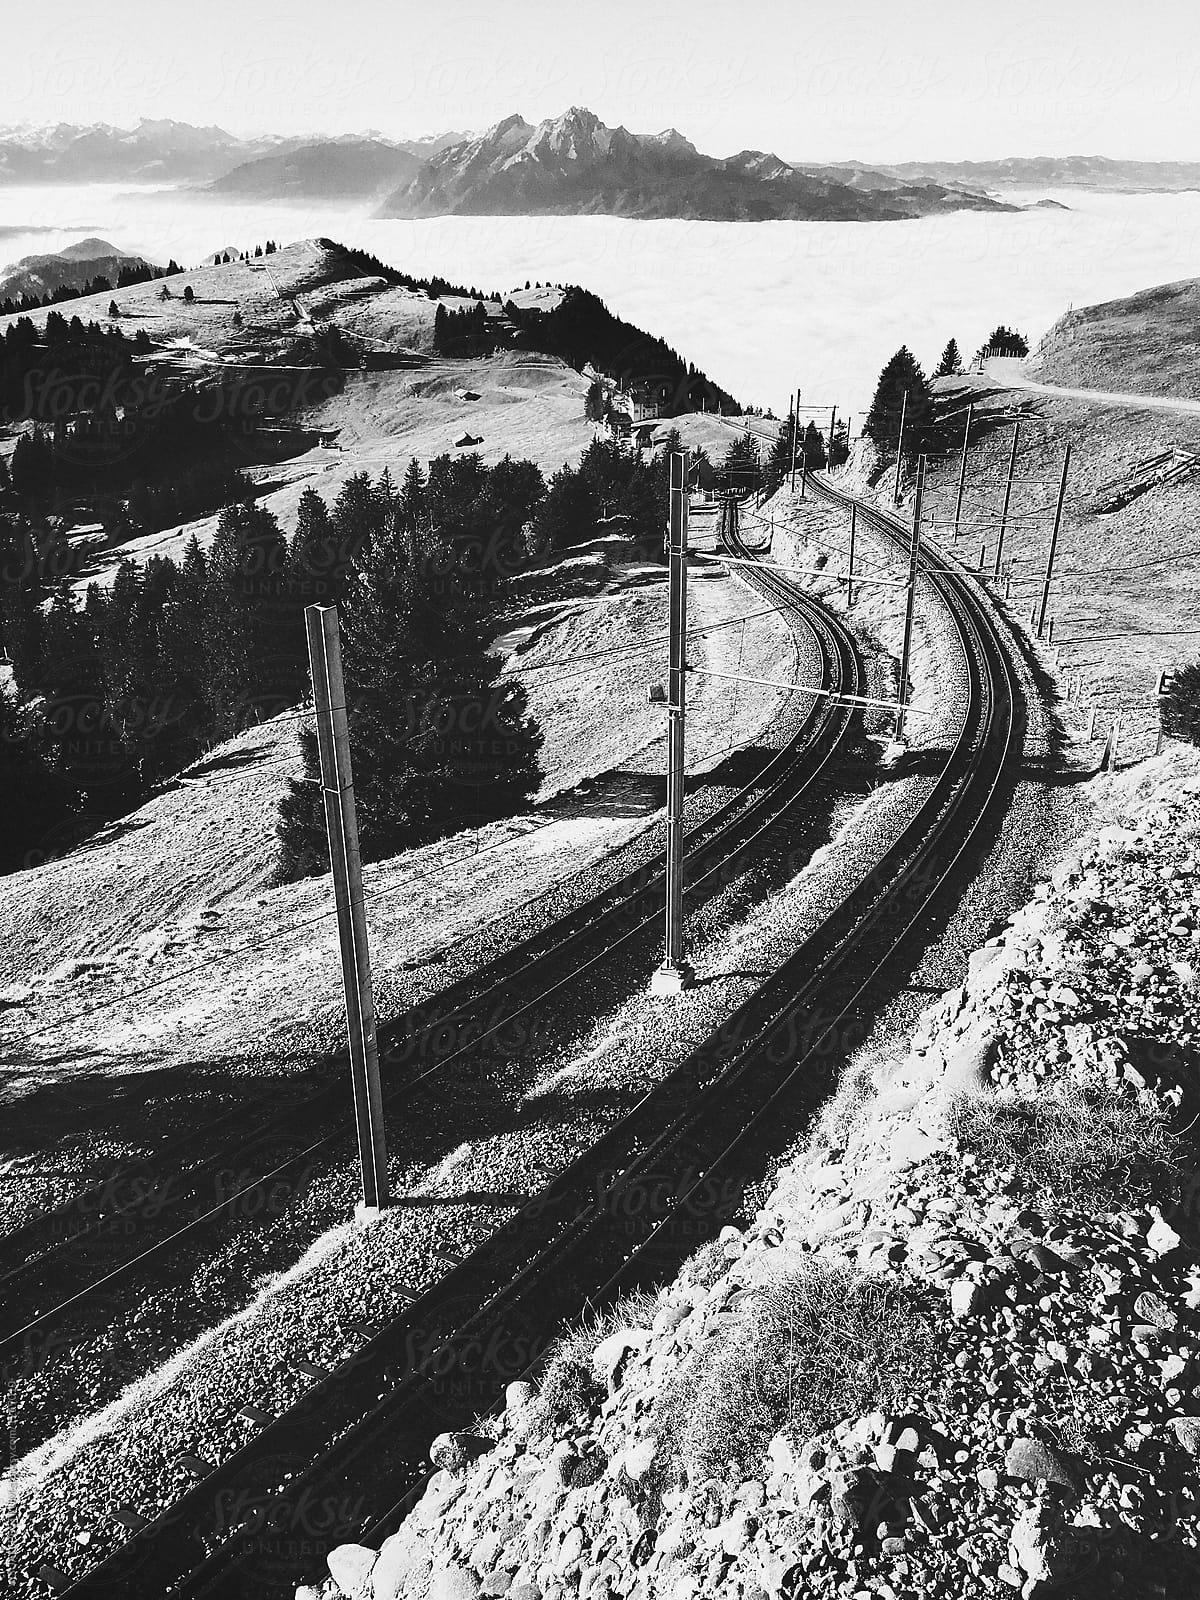 Cogwheel Rail Track on Mount Rigi With Swiss Alps in Black and White